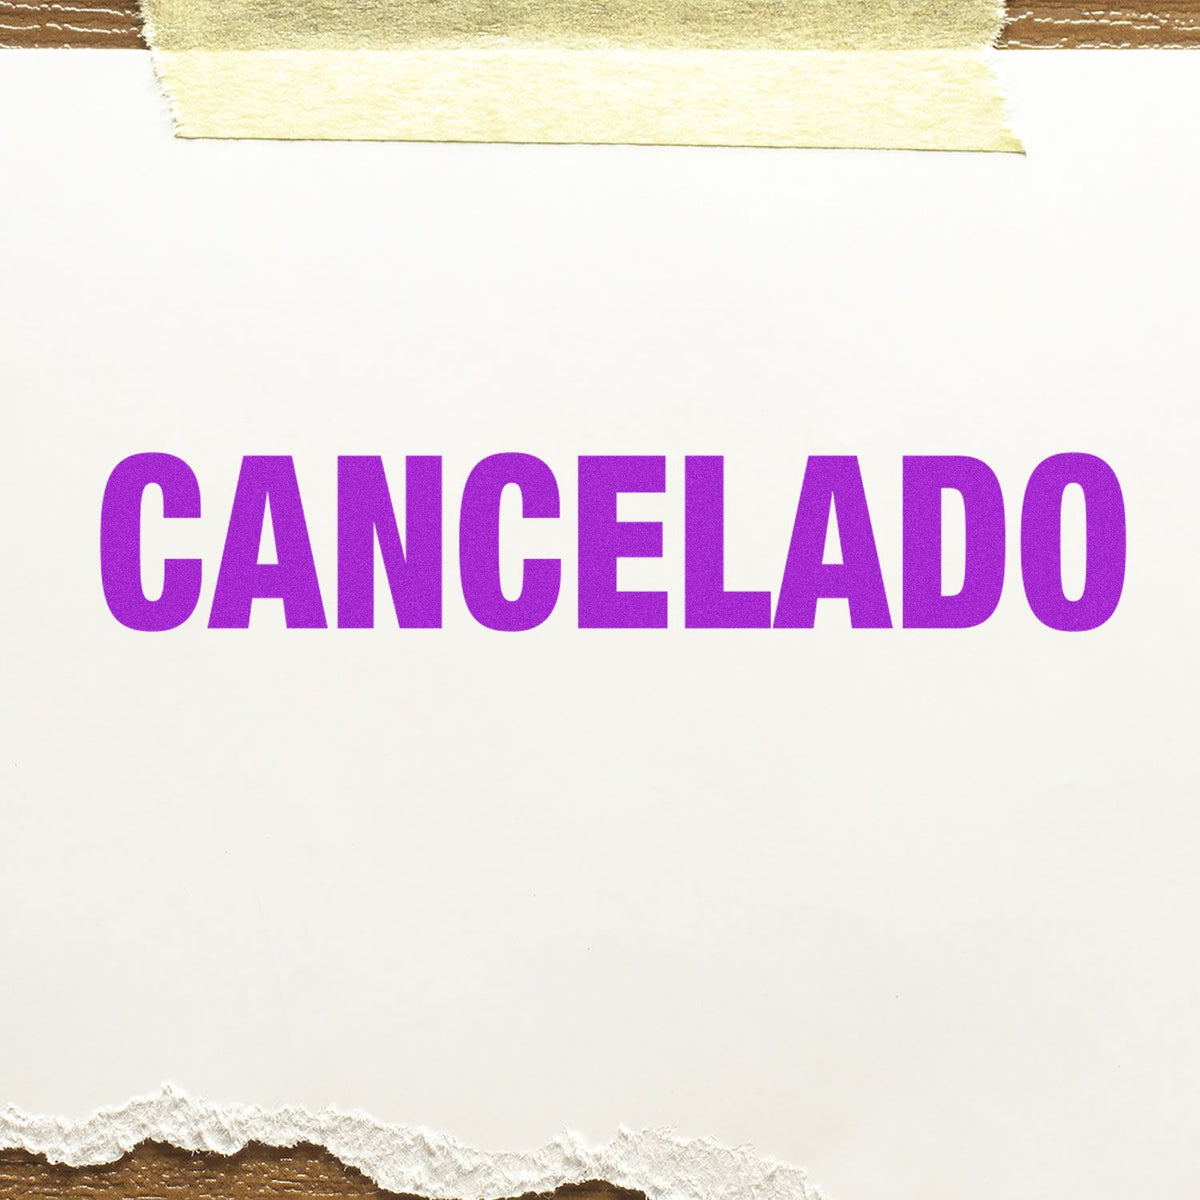 Cancelado Rubber Stamp In Use